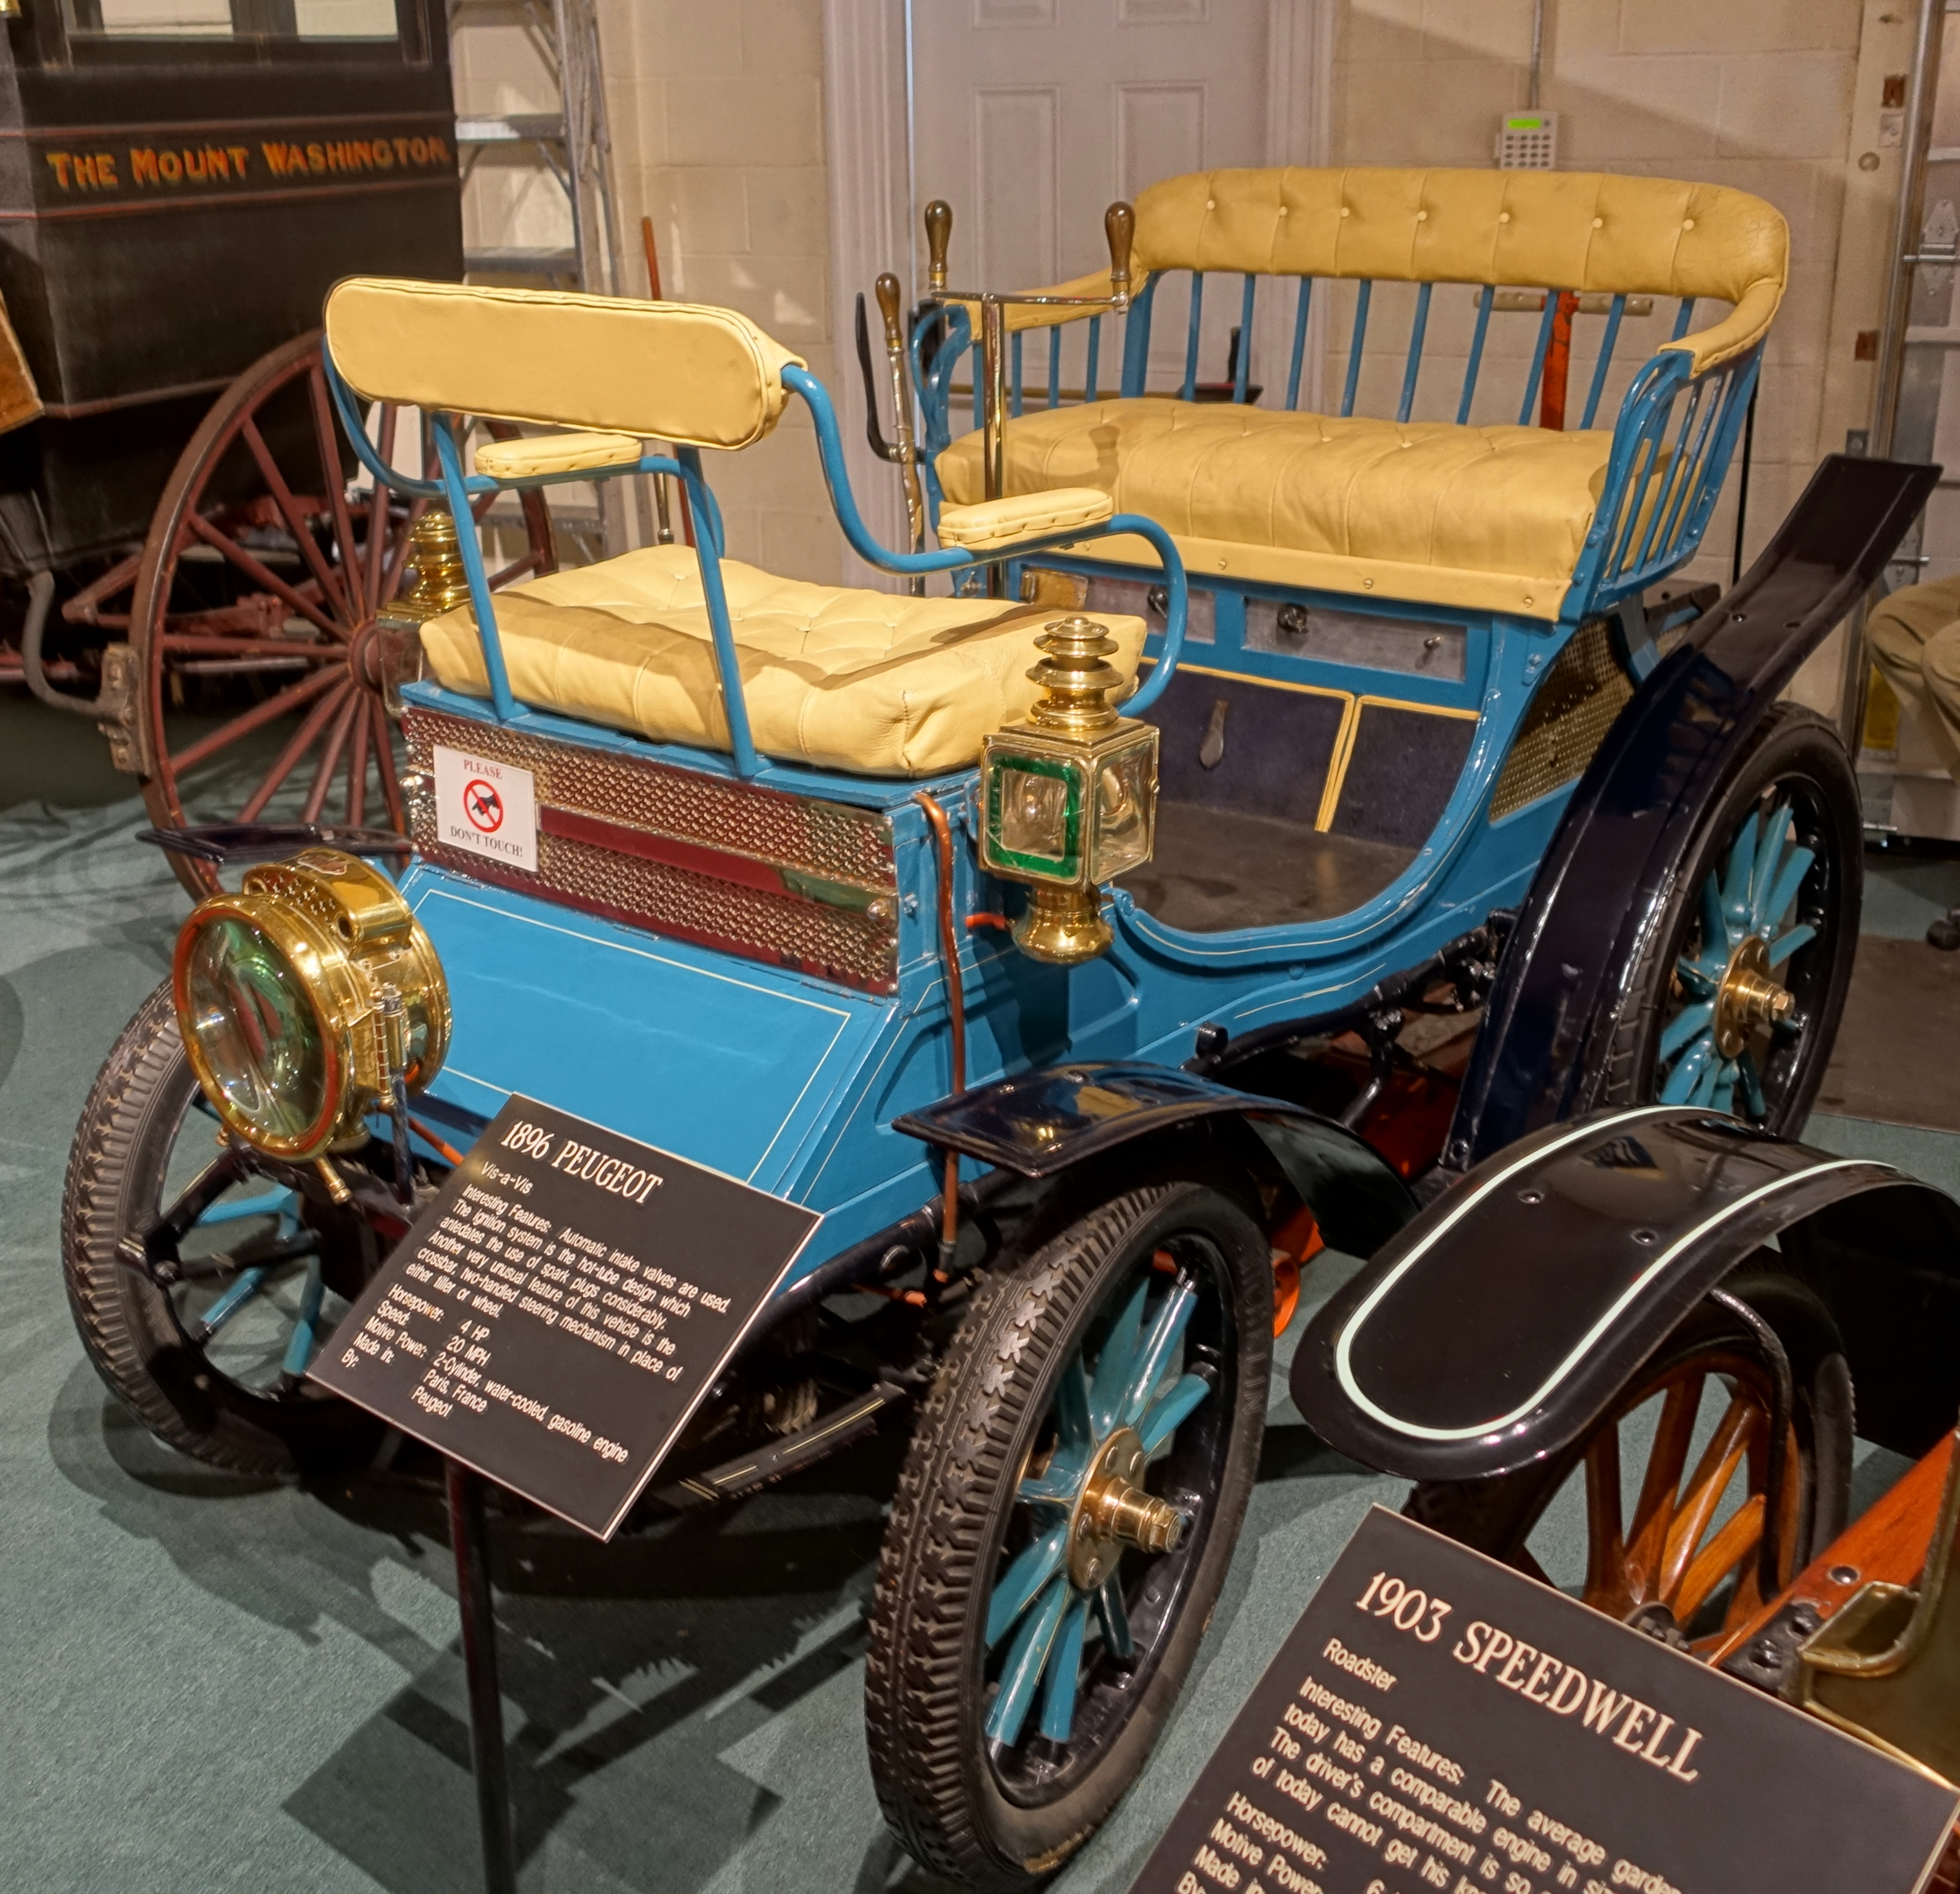 Peugot_Vis-a-Vis_1896_made_by_Peugot_Paris_France_4_HP_2_cylinder_gasoline_engine_-_Luray_Caverns_Car_and_Carriage_Museum_-_Luray_Virginia_-_DSC01195